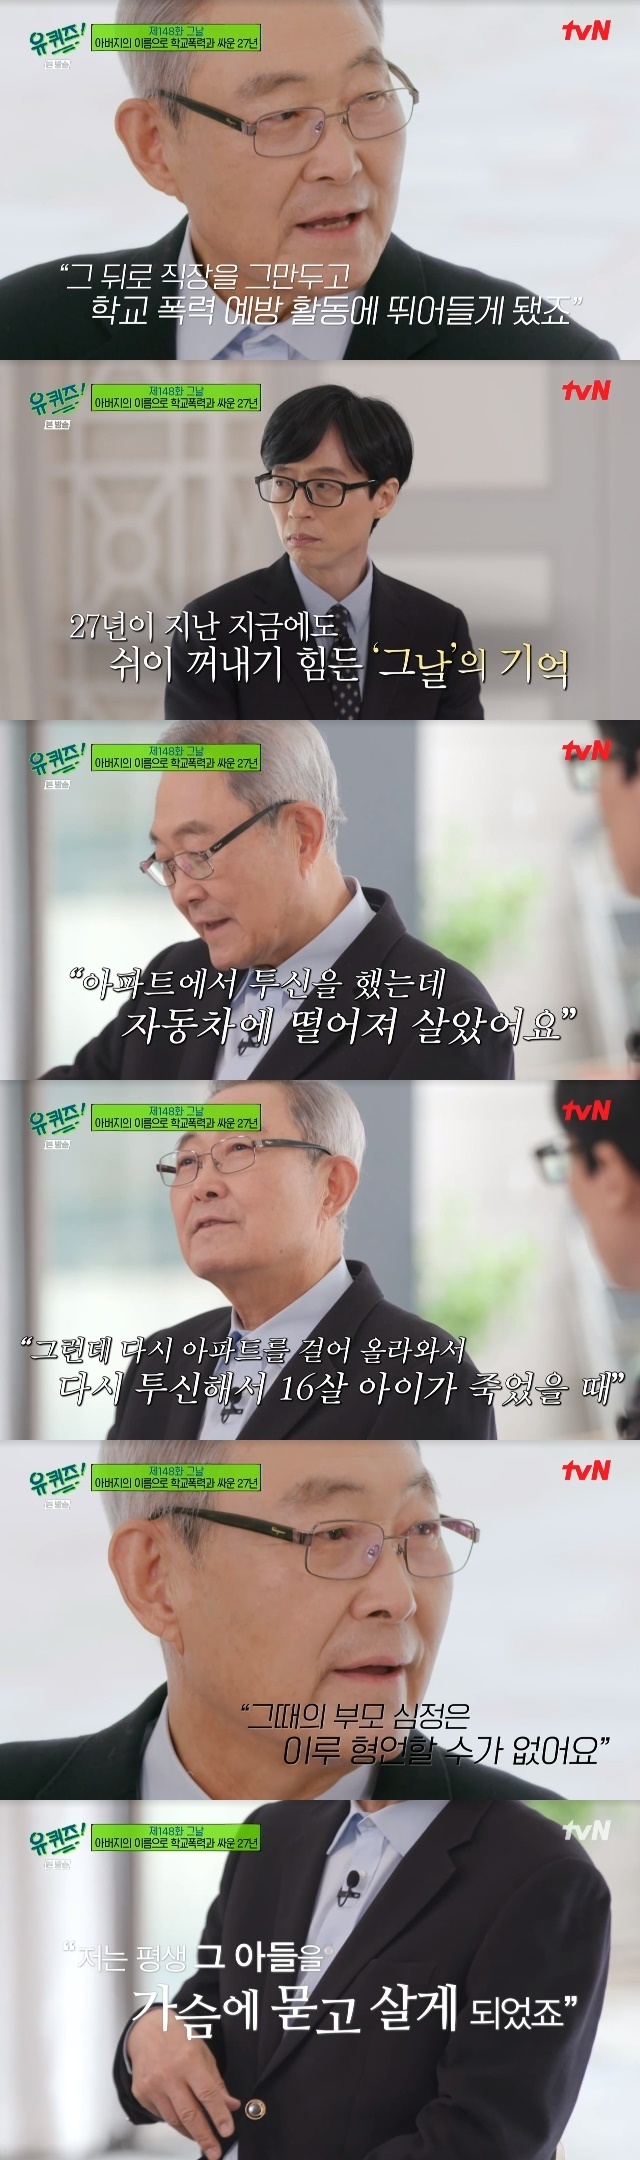 The reason why Kim Jong-ki quit his job and founded the foundation gave tears.In the 148th episode of tvN You Quiz on the Block (hereinafter referred to as You Quiz on the Block), which was broadcast on April 6, Kim Jong-ki, honorary chairman of the Blue Tree Foundation, who fought school violence for 27 years in his fathers name, appeared as a guest.Kim Jong-ki, chairman of the S Group, worked in the secretariat of the S Group before establishing the Blue Tree Foundation.When he asked why he suddenly quit his company after living in the company for more than 20 years, he hesitated. In 1995, 27 years ago, my son had a son I loved, and his son ended his life by school violence at the age of 16.Kim Jong-ki, honorary chairman, said, After that, I left all my jobs and went to school violence prevention activities. I am not proud to say my sons death, but it is hard as a parent.He didnt die (right) by throwing himself into an apartment, but he jumped off the fifth floor.I walked back to the apartment and walked back to the apartment and when the child died, my parents feelings could not be expressed. I have been asking my son to live like a nail in my heart for the rest of my life. I went on a business trip to Beijing, but I could not sleep at night, and I called my wife because I felt strange at dawn, but my wifes voice does not come out.After a long silence, suddenly, like a waterfall, Honey Daehyun (son) is dead, I stopped all schedules and returned to the morgue when the hotel was blown up and the ground collapsed.Even then, I was unaware why our Daehyun had thrown himself twice and ended his life at a young age: too pulsating, pathetic, guilty, remorseful.I could not do anything because of the guilt that I could not take care of my son and immersed myself in the company. I think it is because I passed by. My business trip was June 6, 1995. I left something and called on the 5th floor and said, Give me something Father.I went to the airport with Go on. I thought Daehyun was preparing for death.So I jumped on June 8 that night, and during the day my mother came to see the shop and quietly picked up the goods and let them go home and went out.That was his last act on her. He had his own personalities. After he died, everything was arranged, more parently heart.There was a sadness through what led our son to death. Kim Jong-ki, the honorary chairman, asked if there was any situation to guess. I did not know that I was violent at school, but I was torn, buried in dirt, broken glasses, and wounded.Hes a big boy. Hes handsomer than me. He was the head of school, and Daehyun had a fan club.I think it was hit by a senior student, but I did not talk about it, and I met a gangster through the overpass, I fell down and got hurt.But it is not that, but when the beeping comes at night, it seems that the hard time has been repeated when I went to the playground and karaoke room.He also told me about the absurdity of his life in the morgue at the time, saying that the students who hit him appeared and said, Daehyun is dead and looks troublesome.More crucially, Daehyun had a beep and the text keeps coming: Angels, goodbye, Im sorry I cant help youve been constantly coming for months.So Daehyun found out that he was violent and was violent by a senior student, but he could not tell the truth to Father.I think it will be harder for my seniors if I say it. 